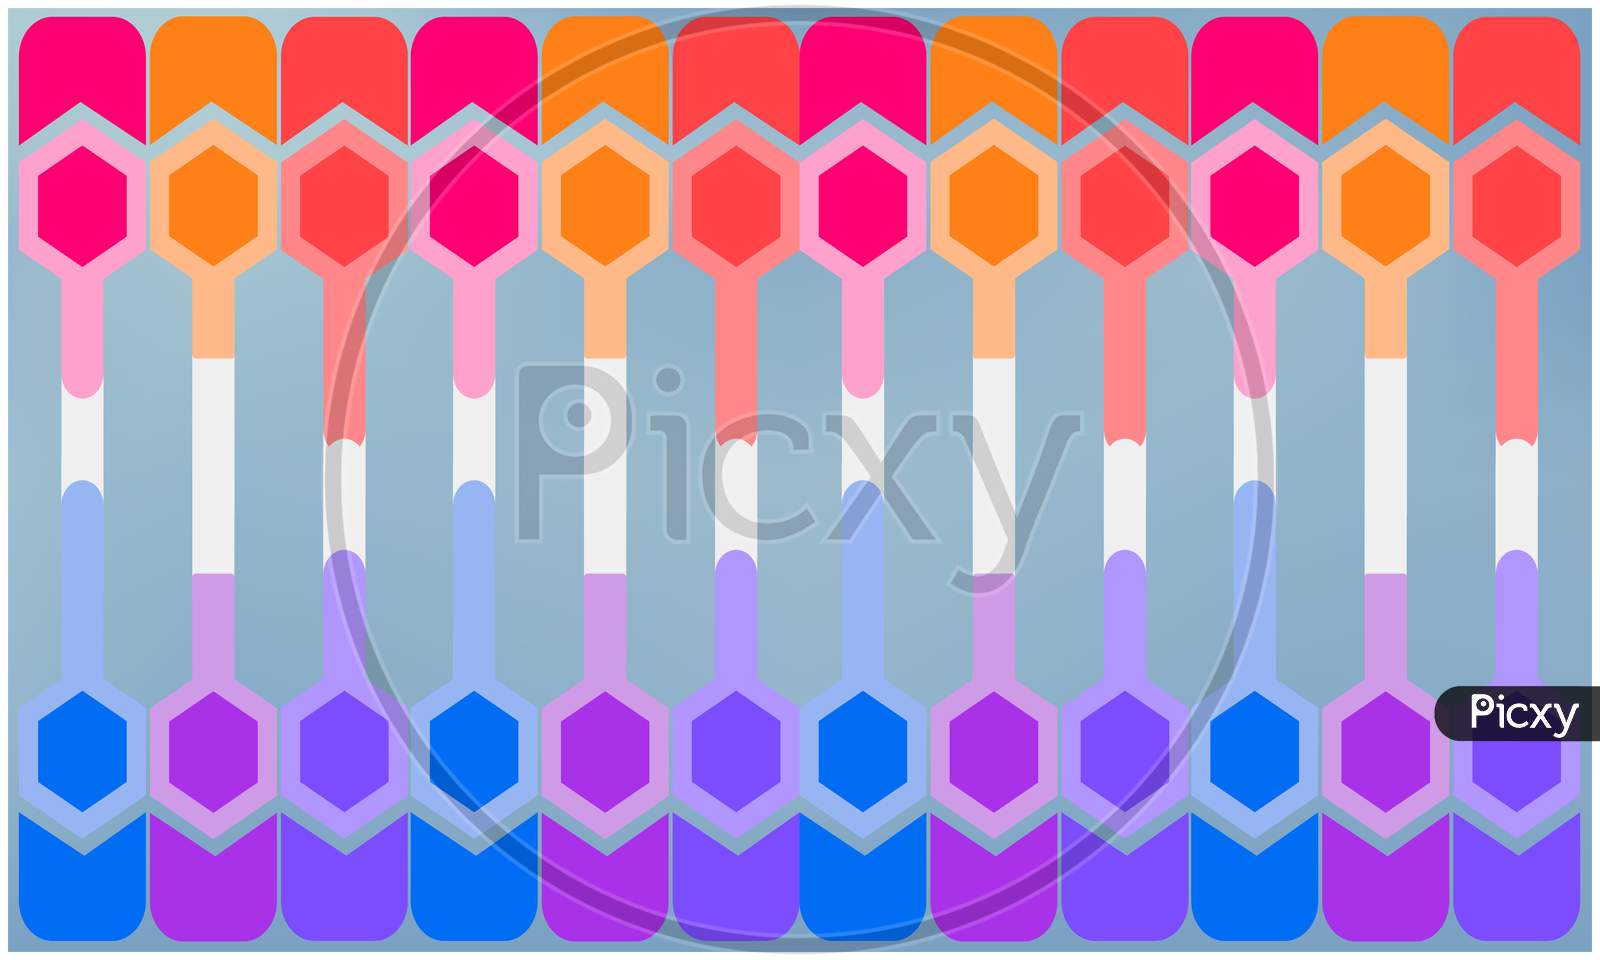 Digital Textile Design Of Hexagon Art On Abstract Background